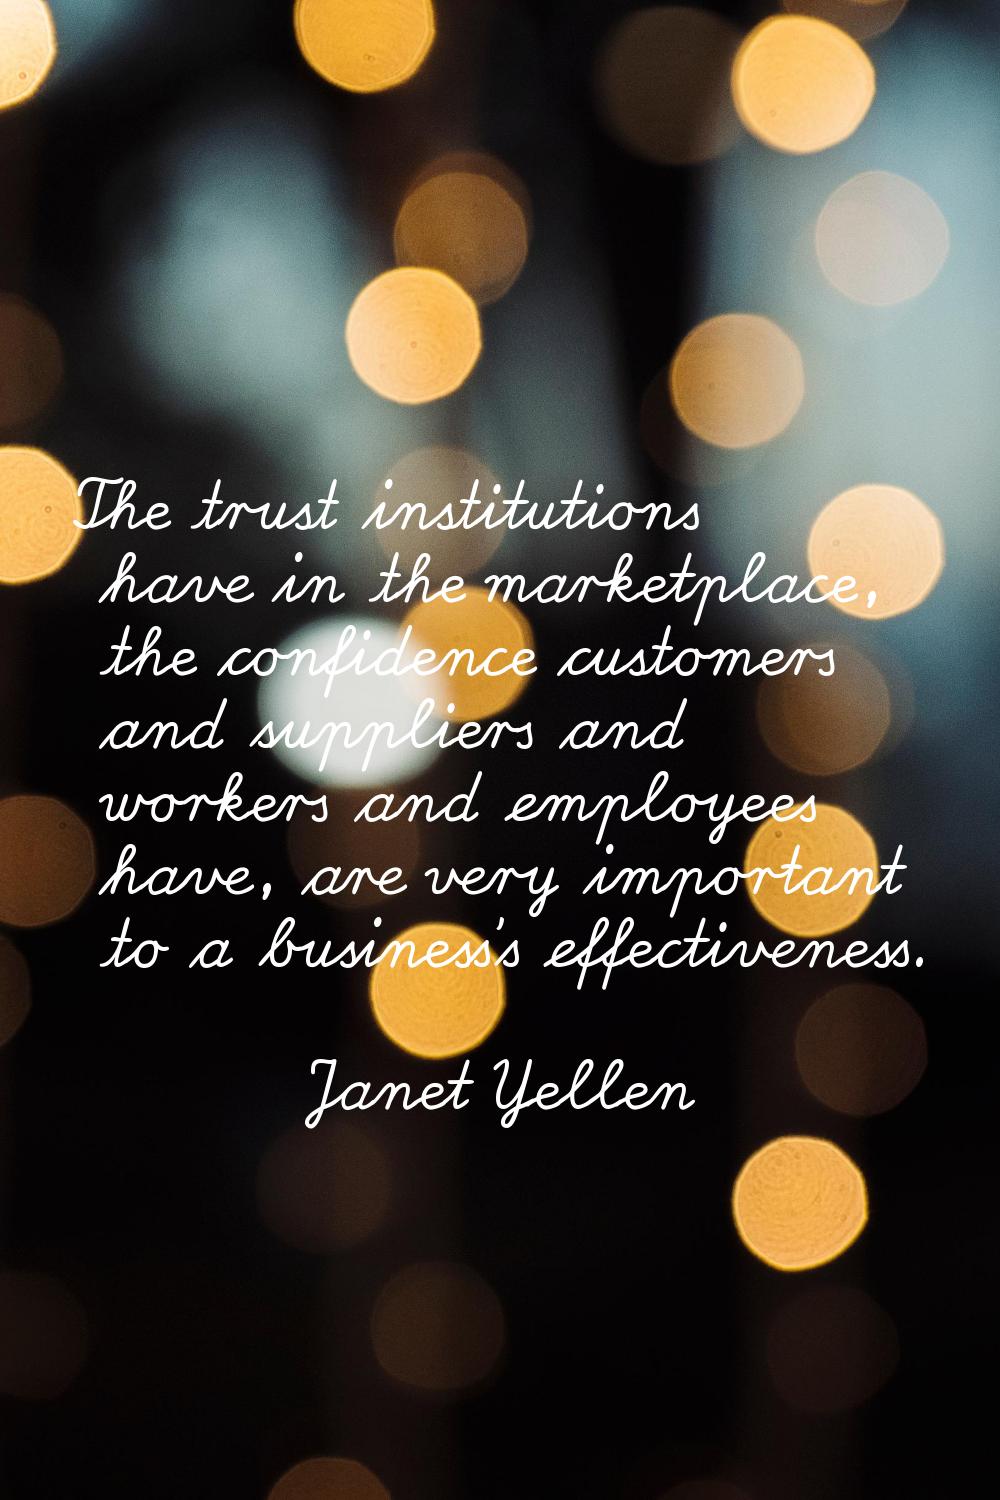 The trust institutions have in the marketplace, the confidence customers and suppliers and workers 